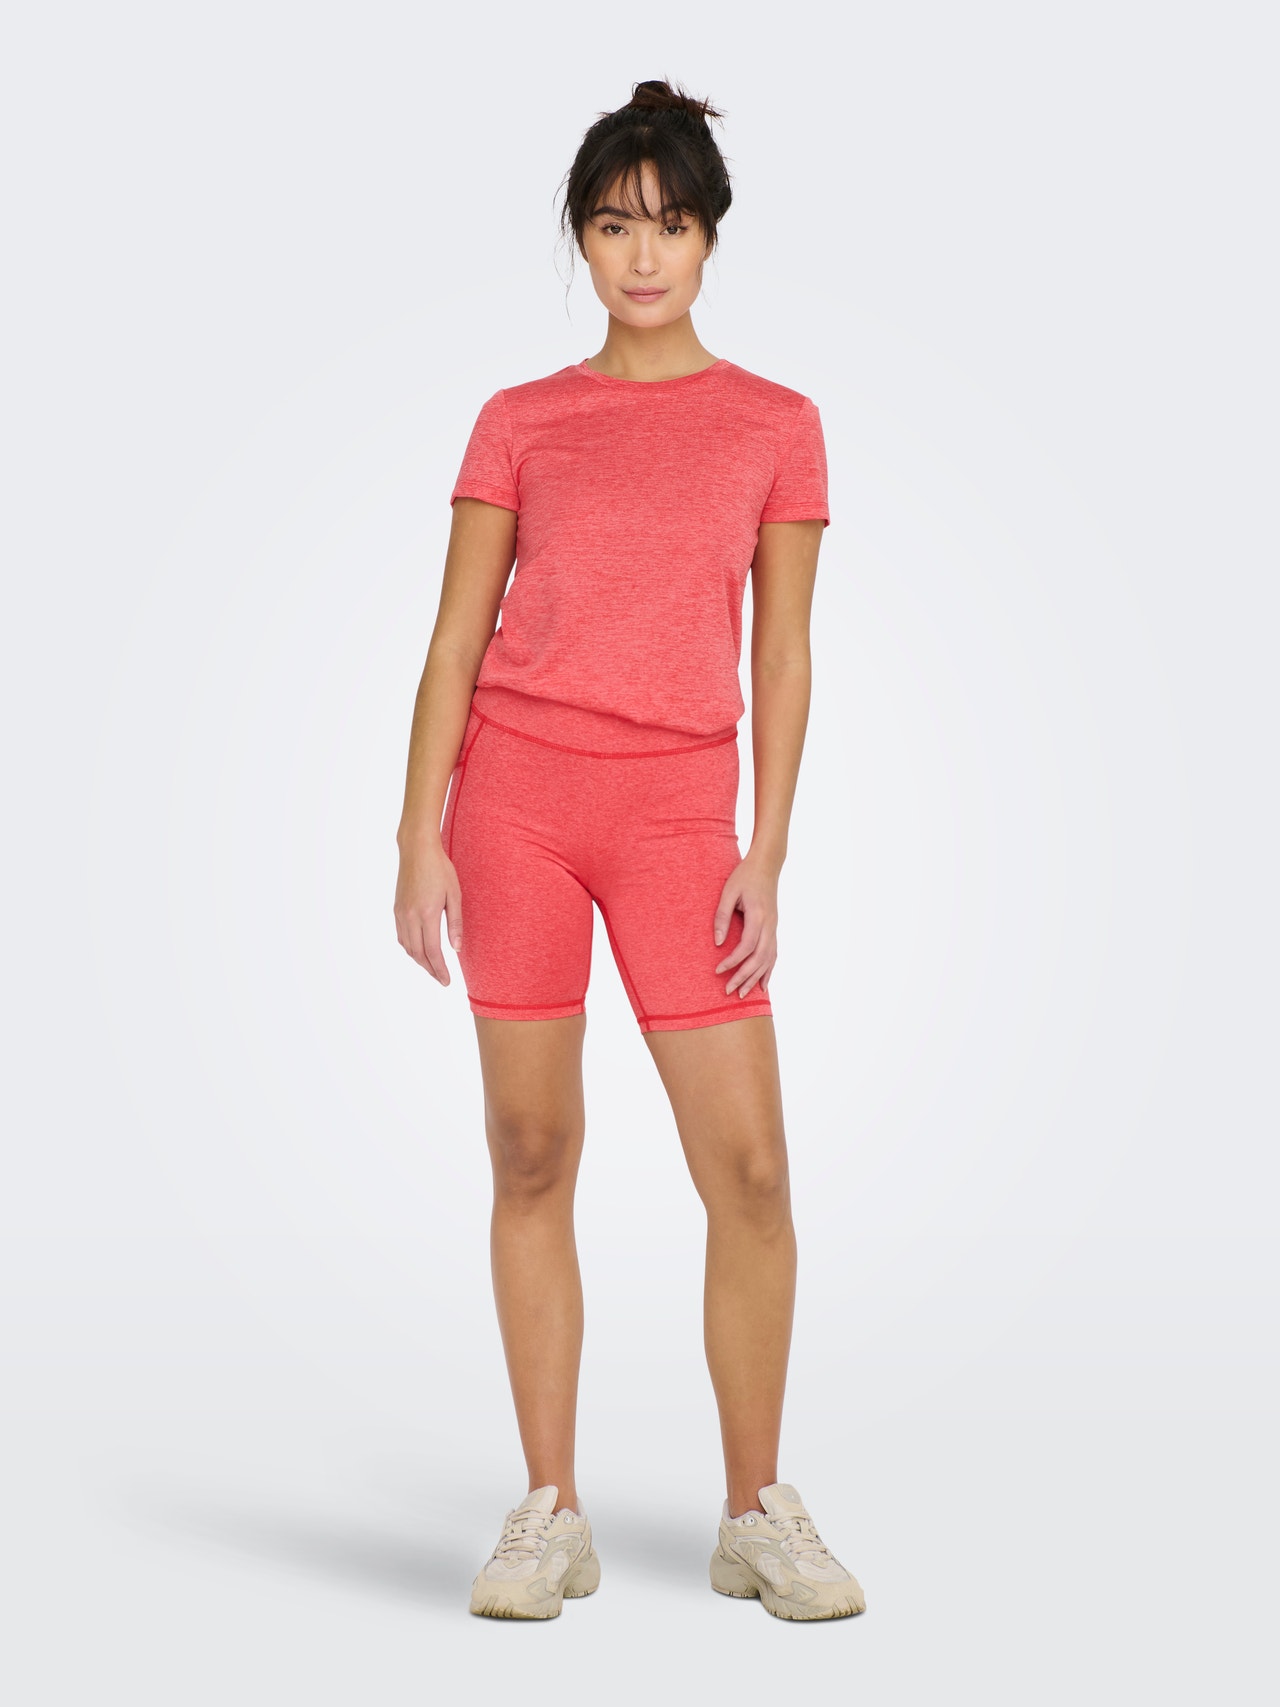 ONLY Regular Fit O-Neck T-Shirt -Sun Kissed Coral - 15285999